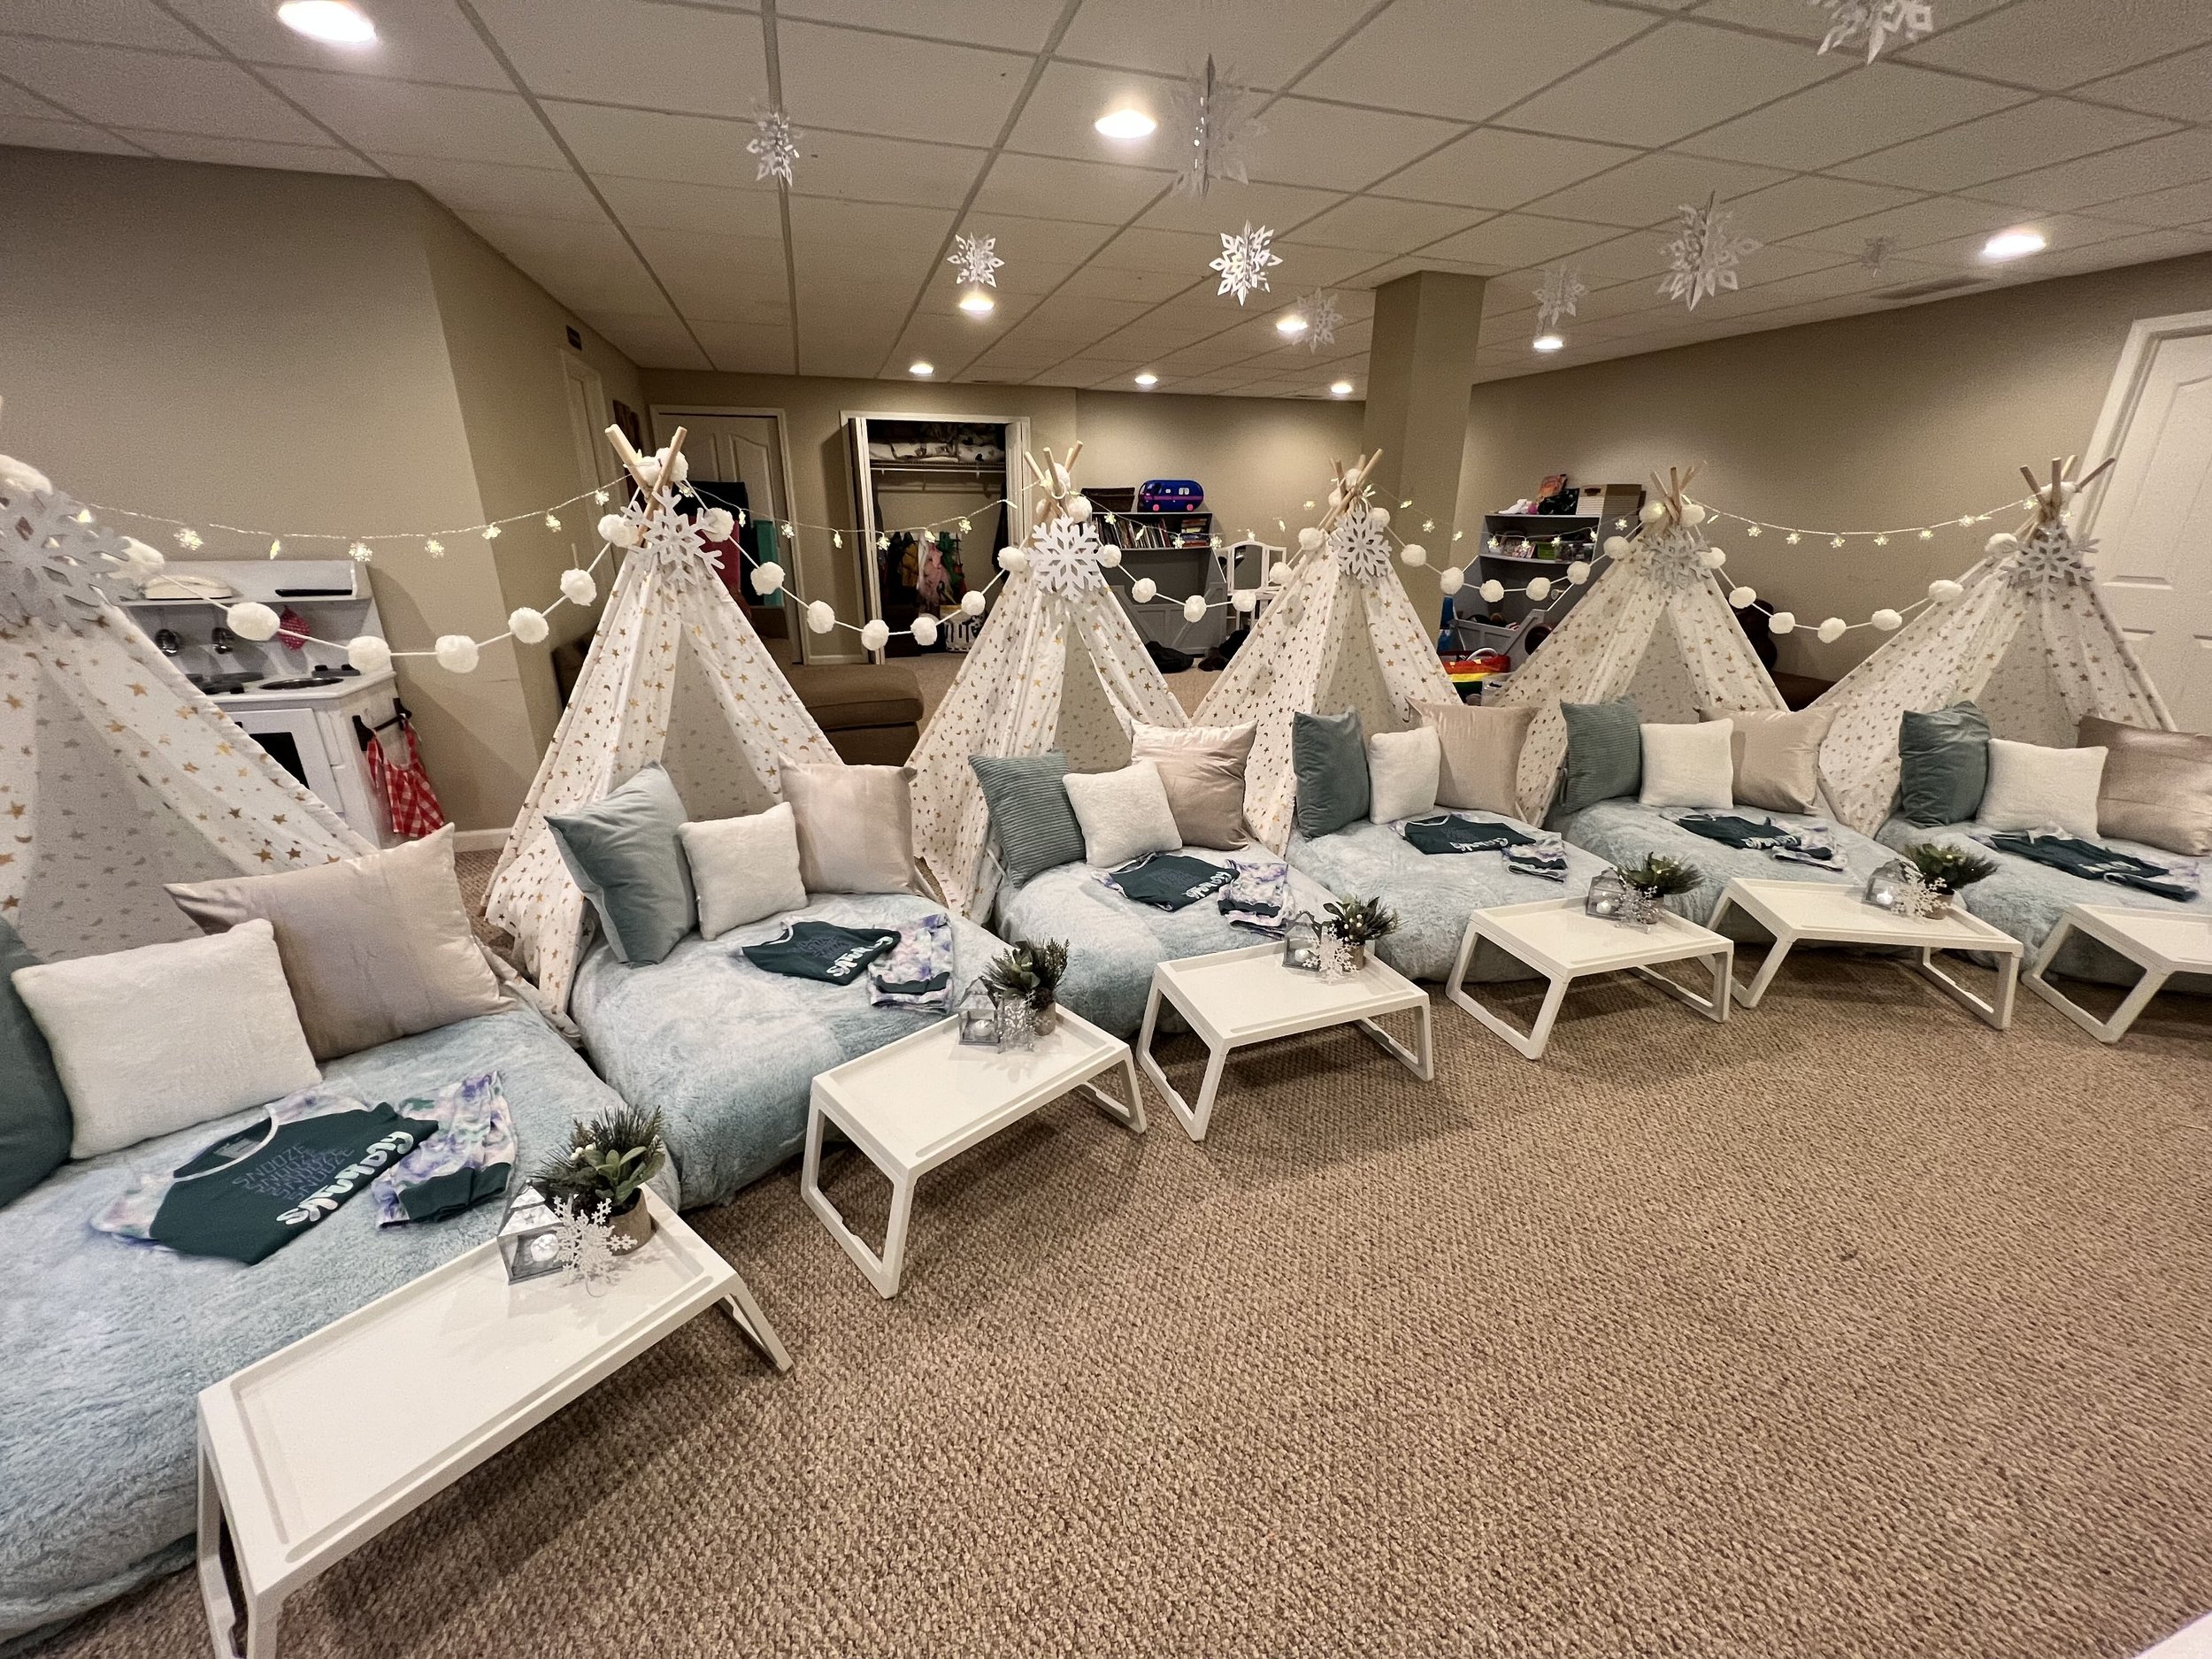 Practically Perfect Events - Slumber Party Tent Rentals in Michigan